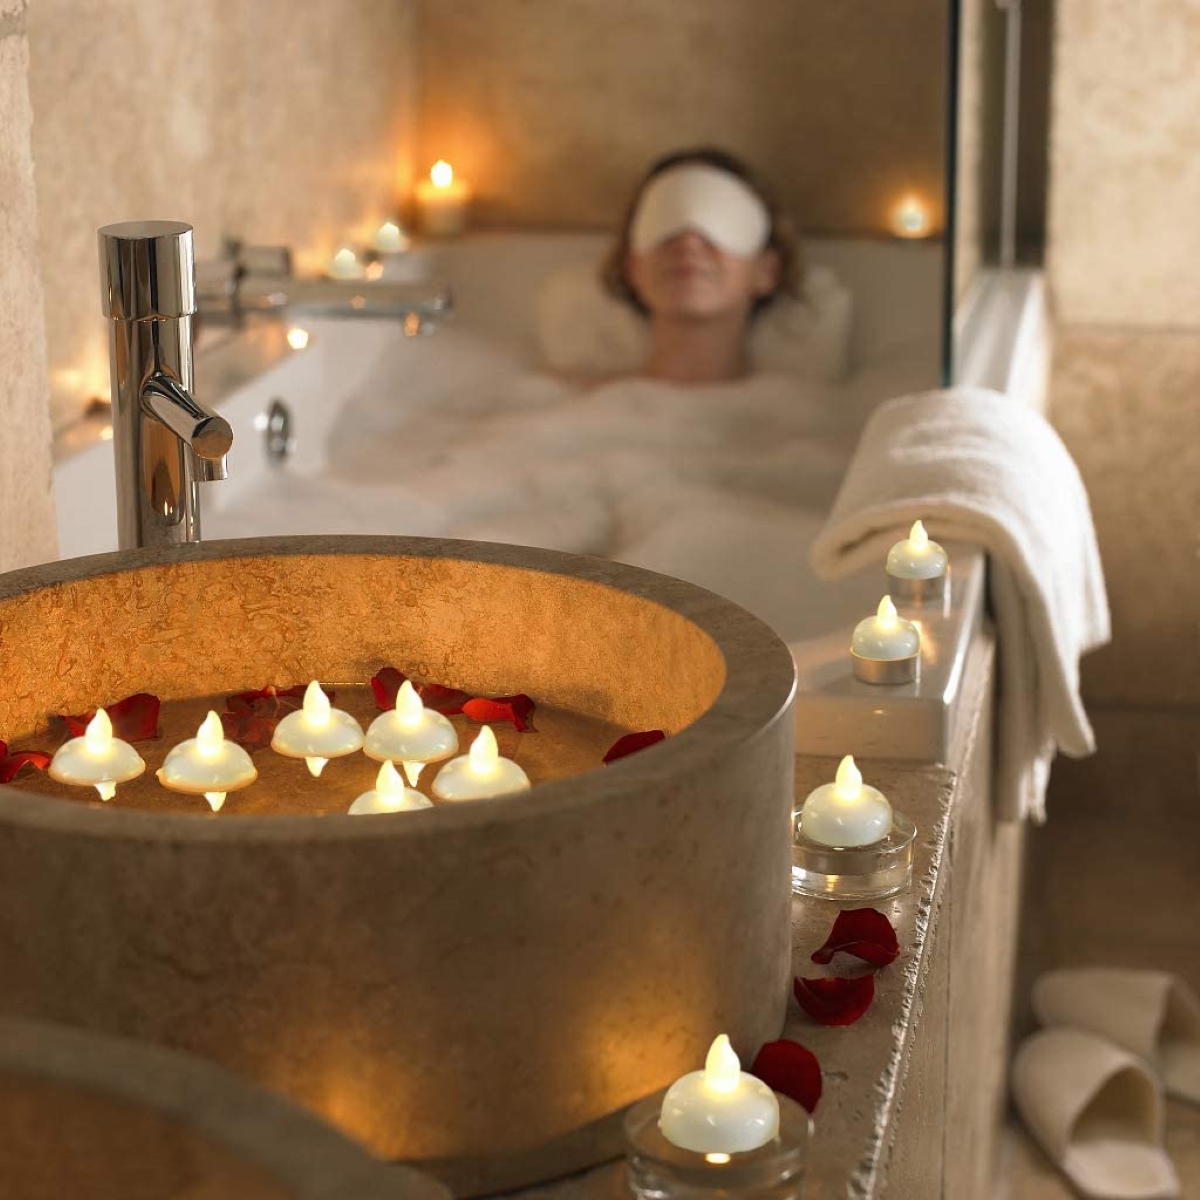 decor with candles - tea light candles around woman in tub